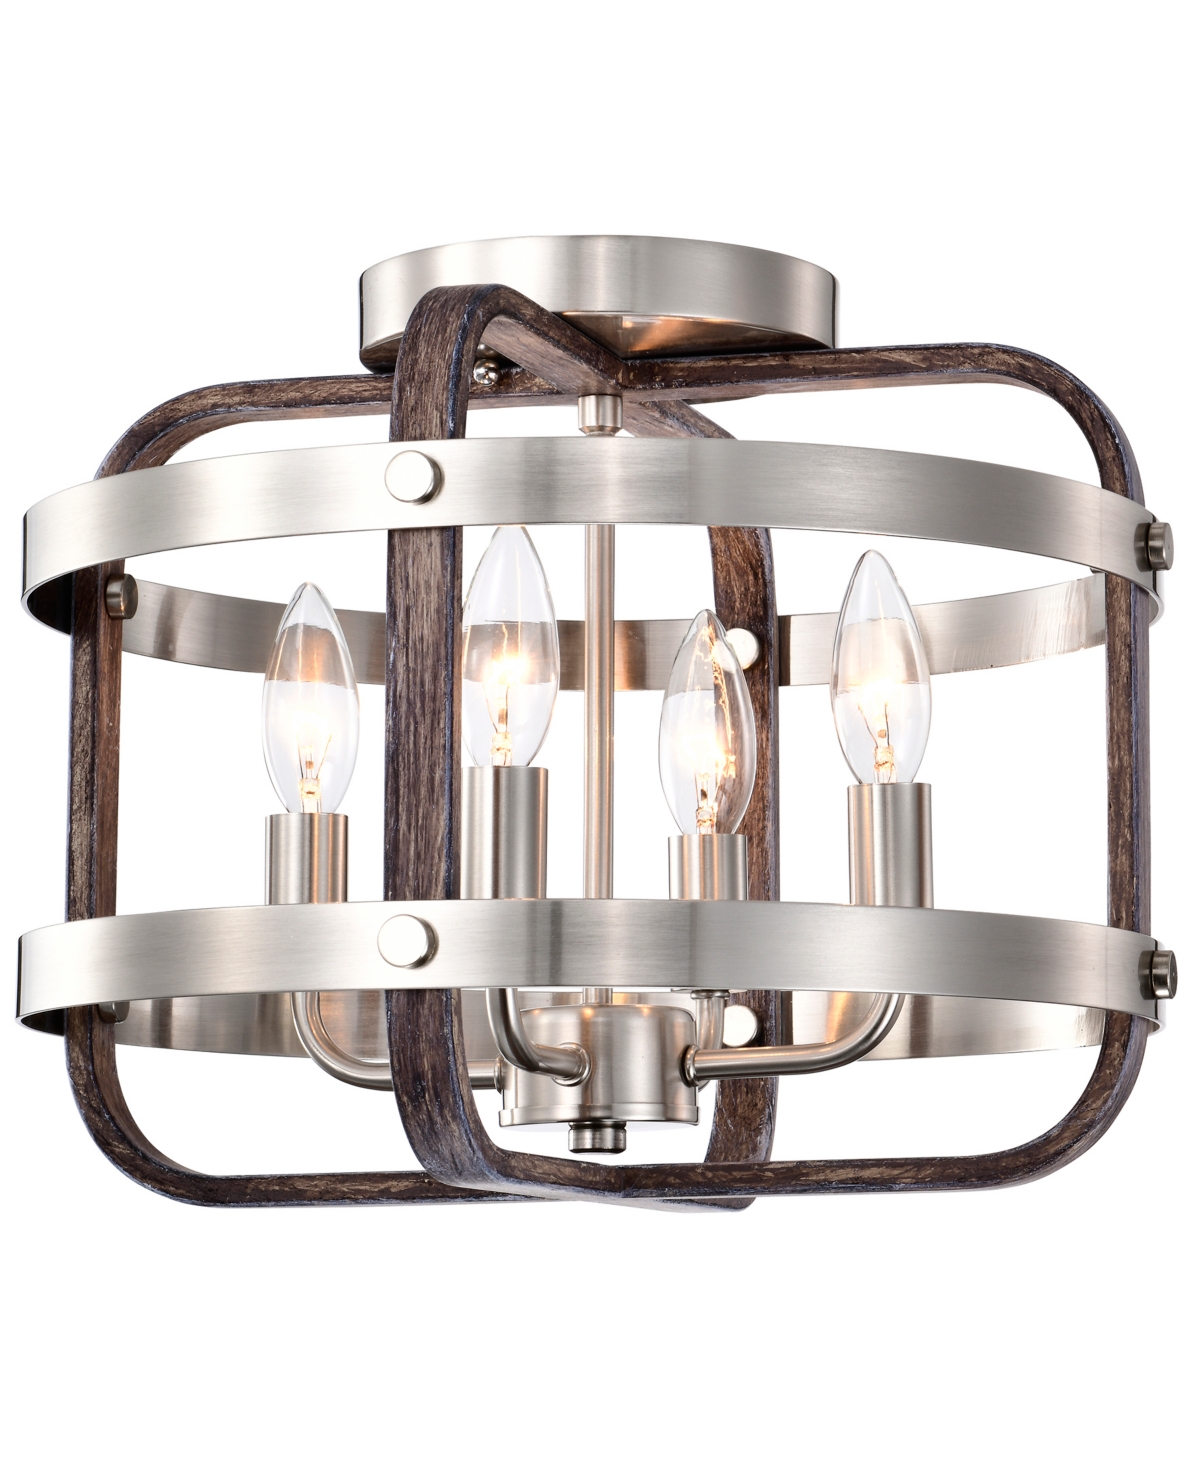 Home Accessories Kasia 14" 4-light Indoor Flush Mount With Light Kit In Satin Silver And Faux Wood Grain